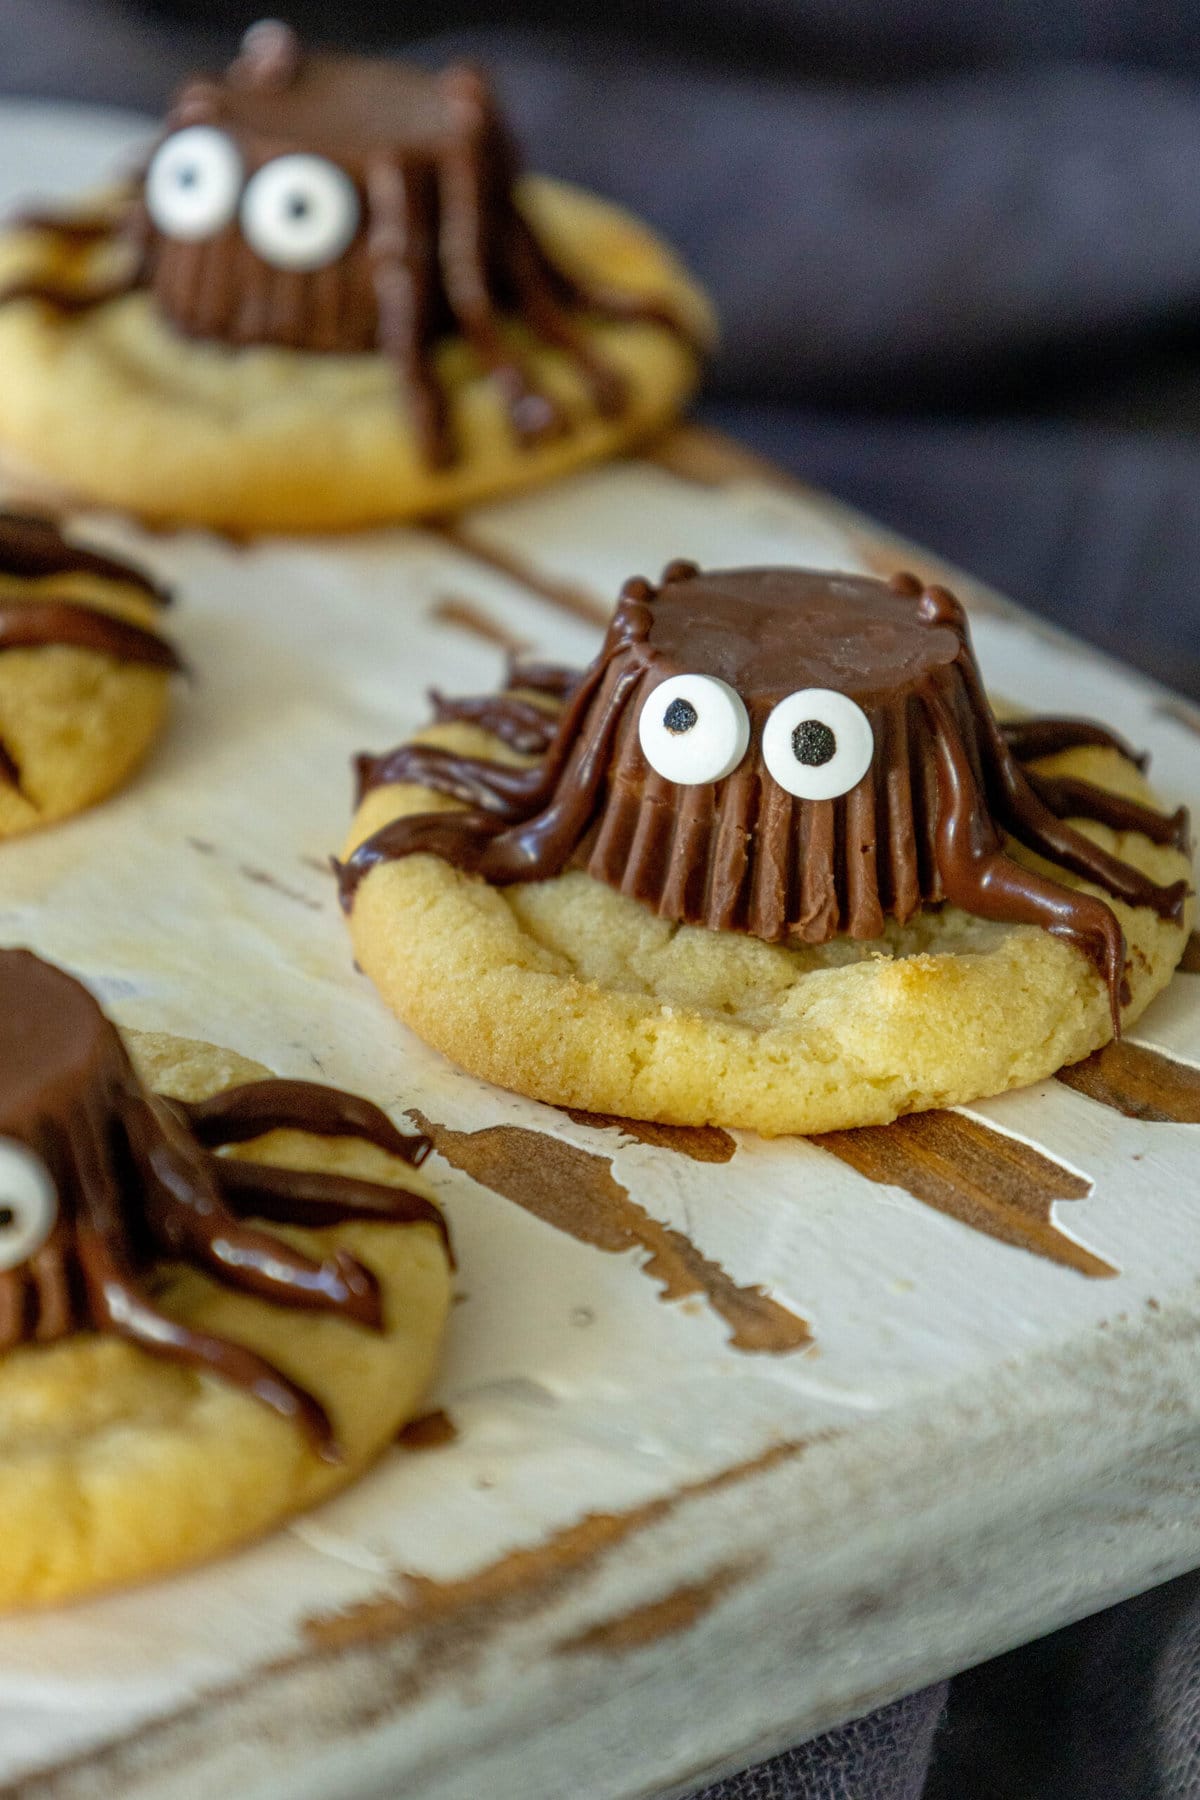 picture of cookies on a cutting board with peanut butter cups decorated to look like spiders on top